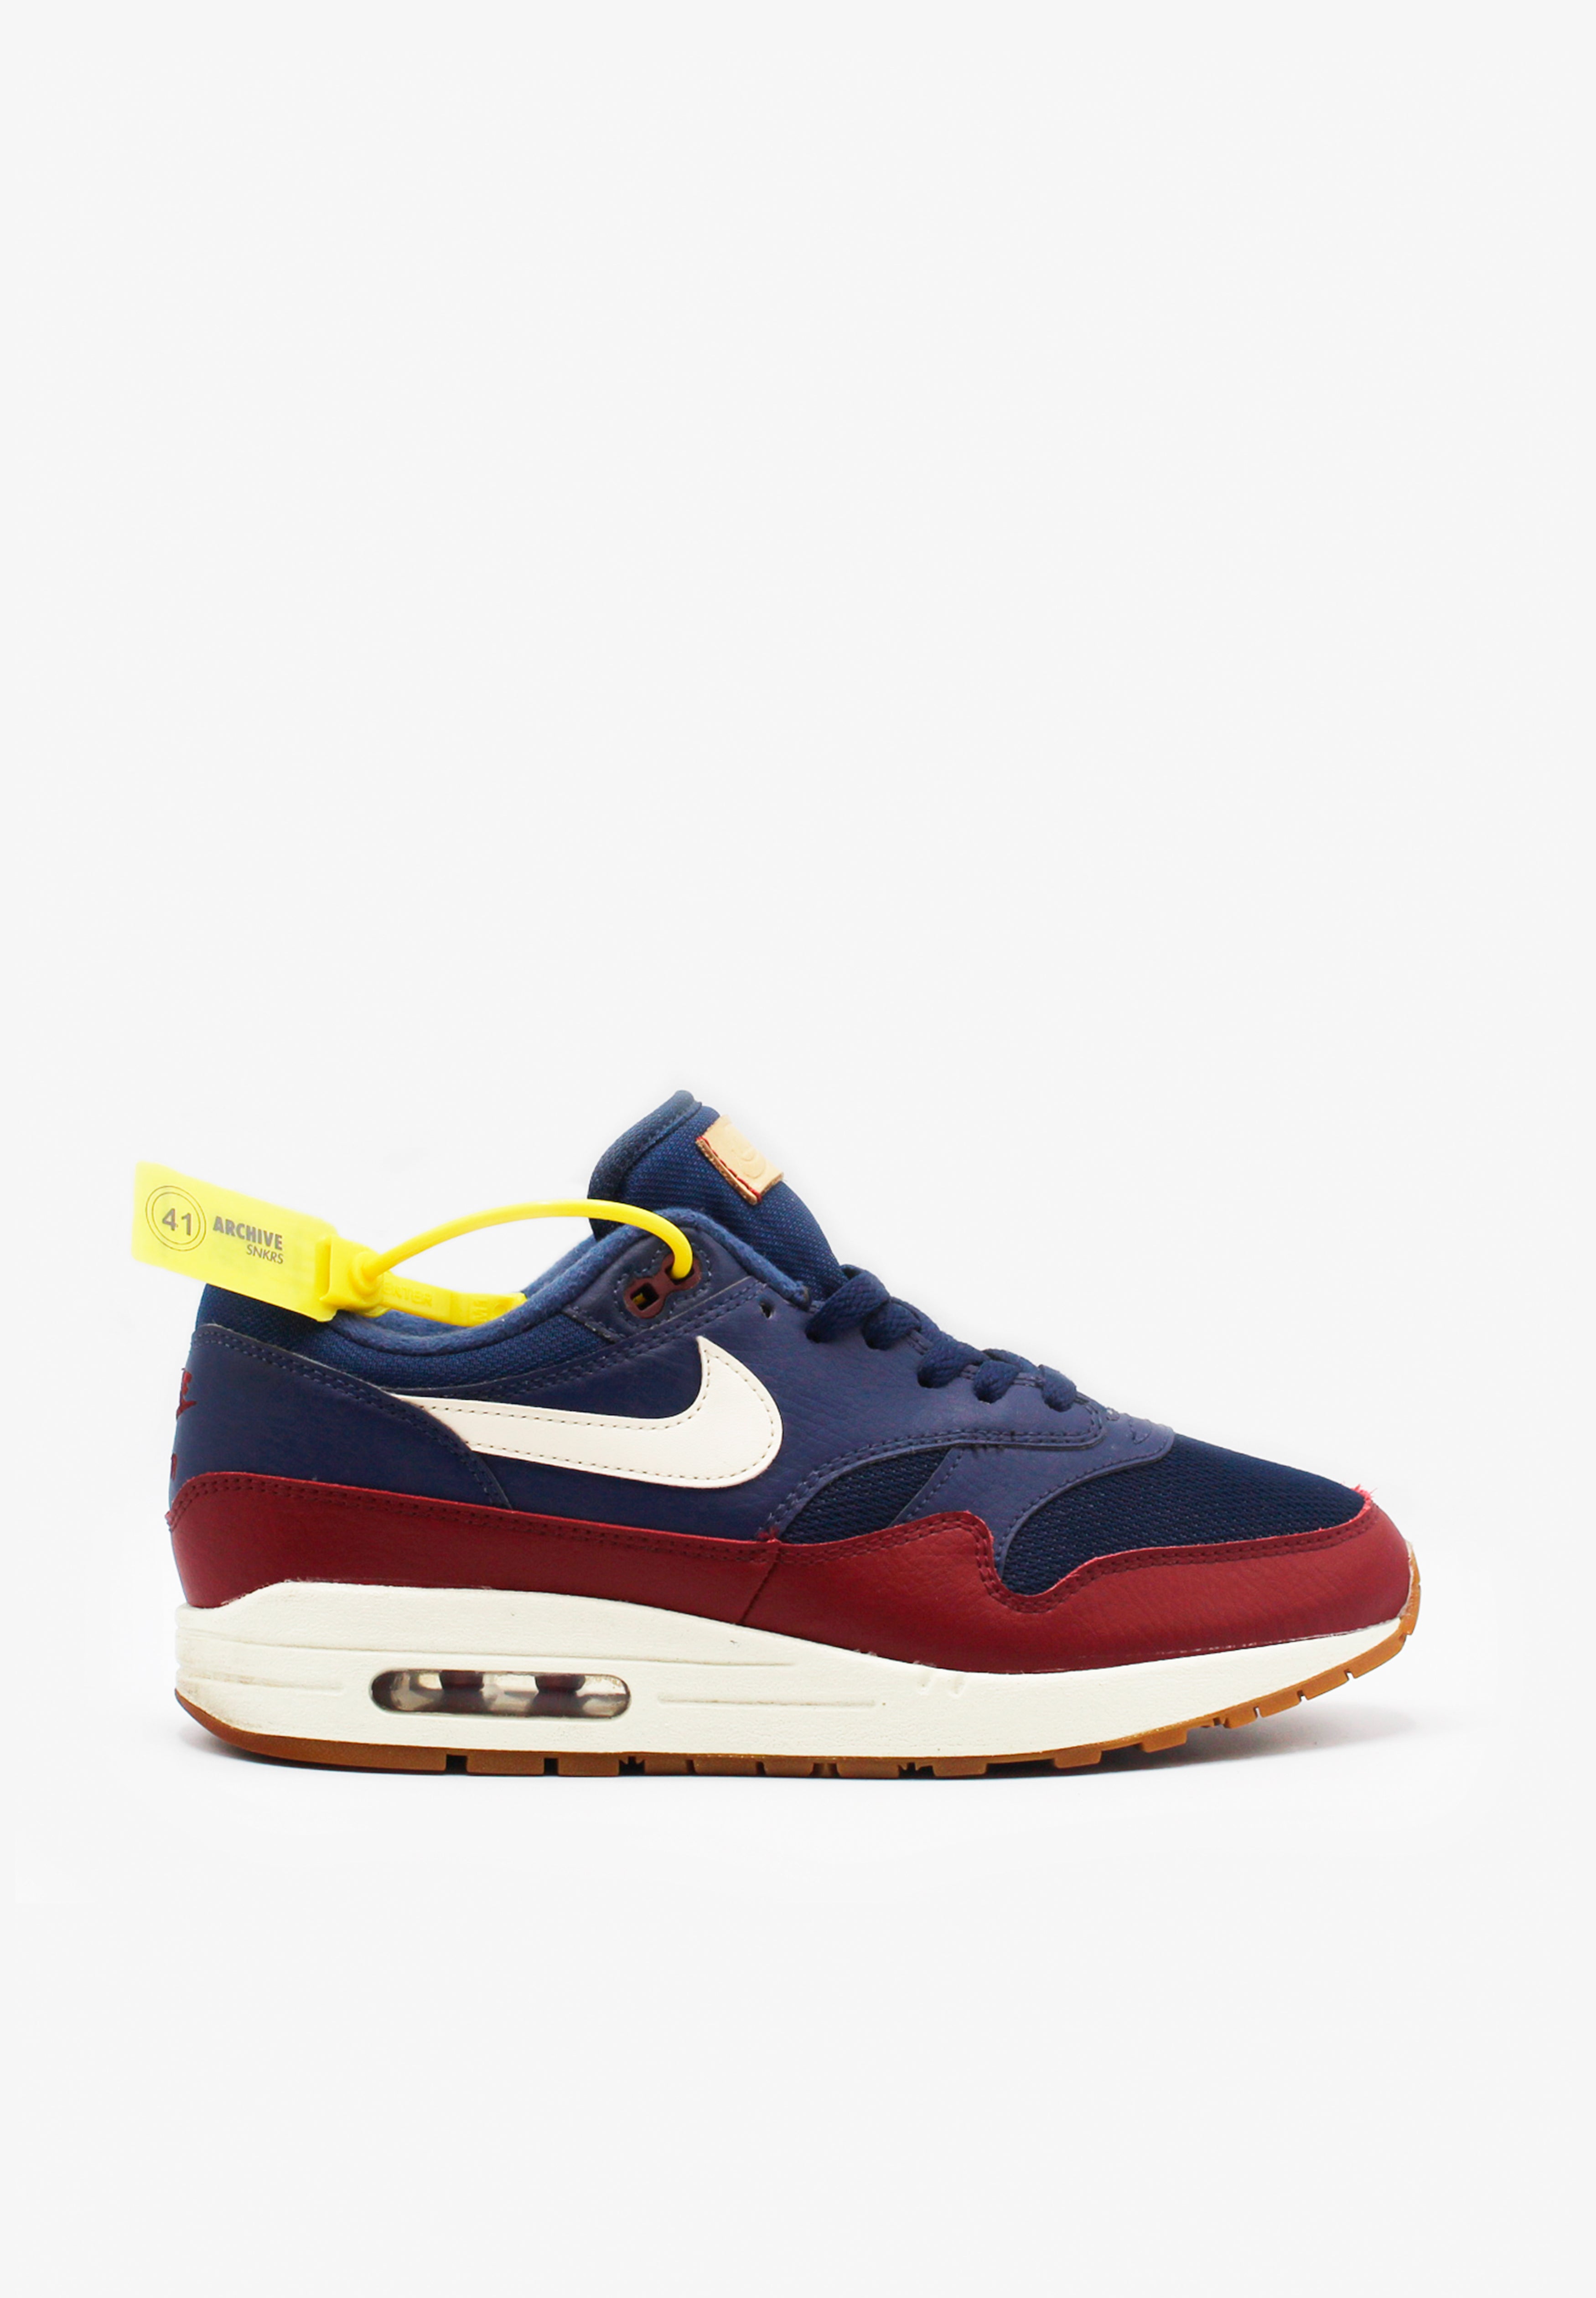 ARCHIVE SNEAKRS | SNEAKERS NIKE AIR MAX 1 TALLA 41